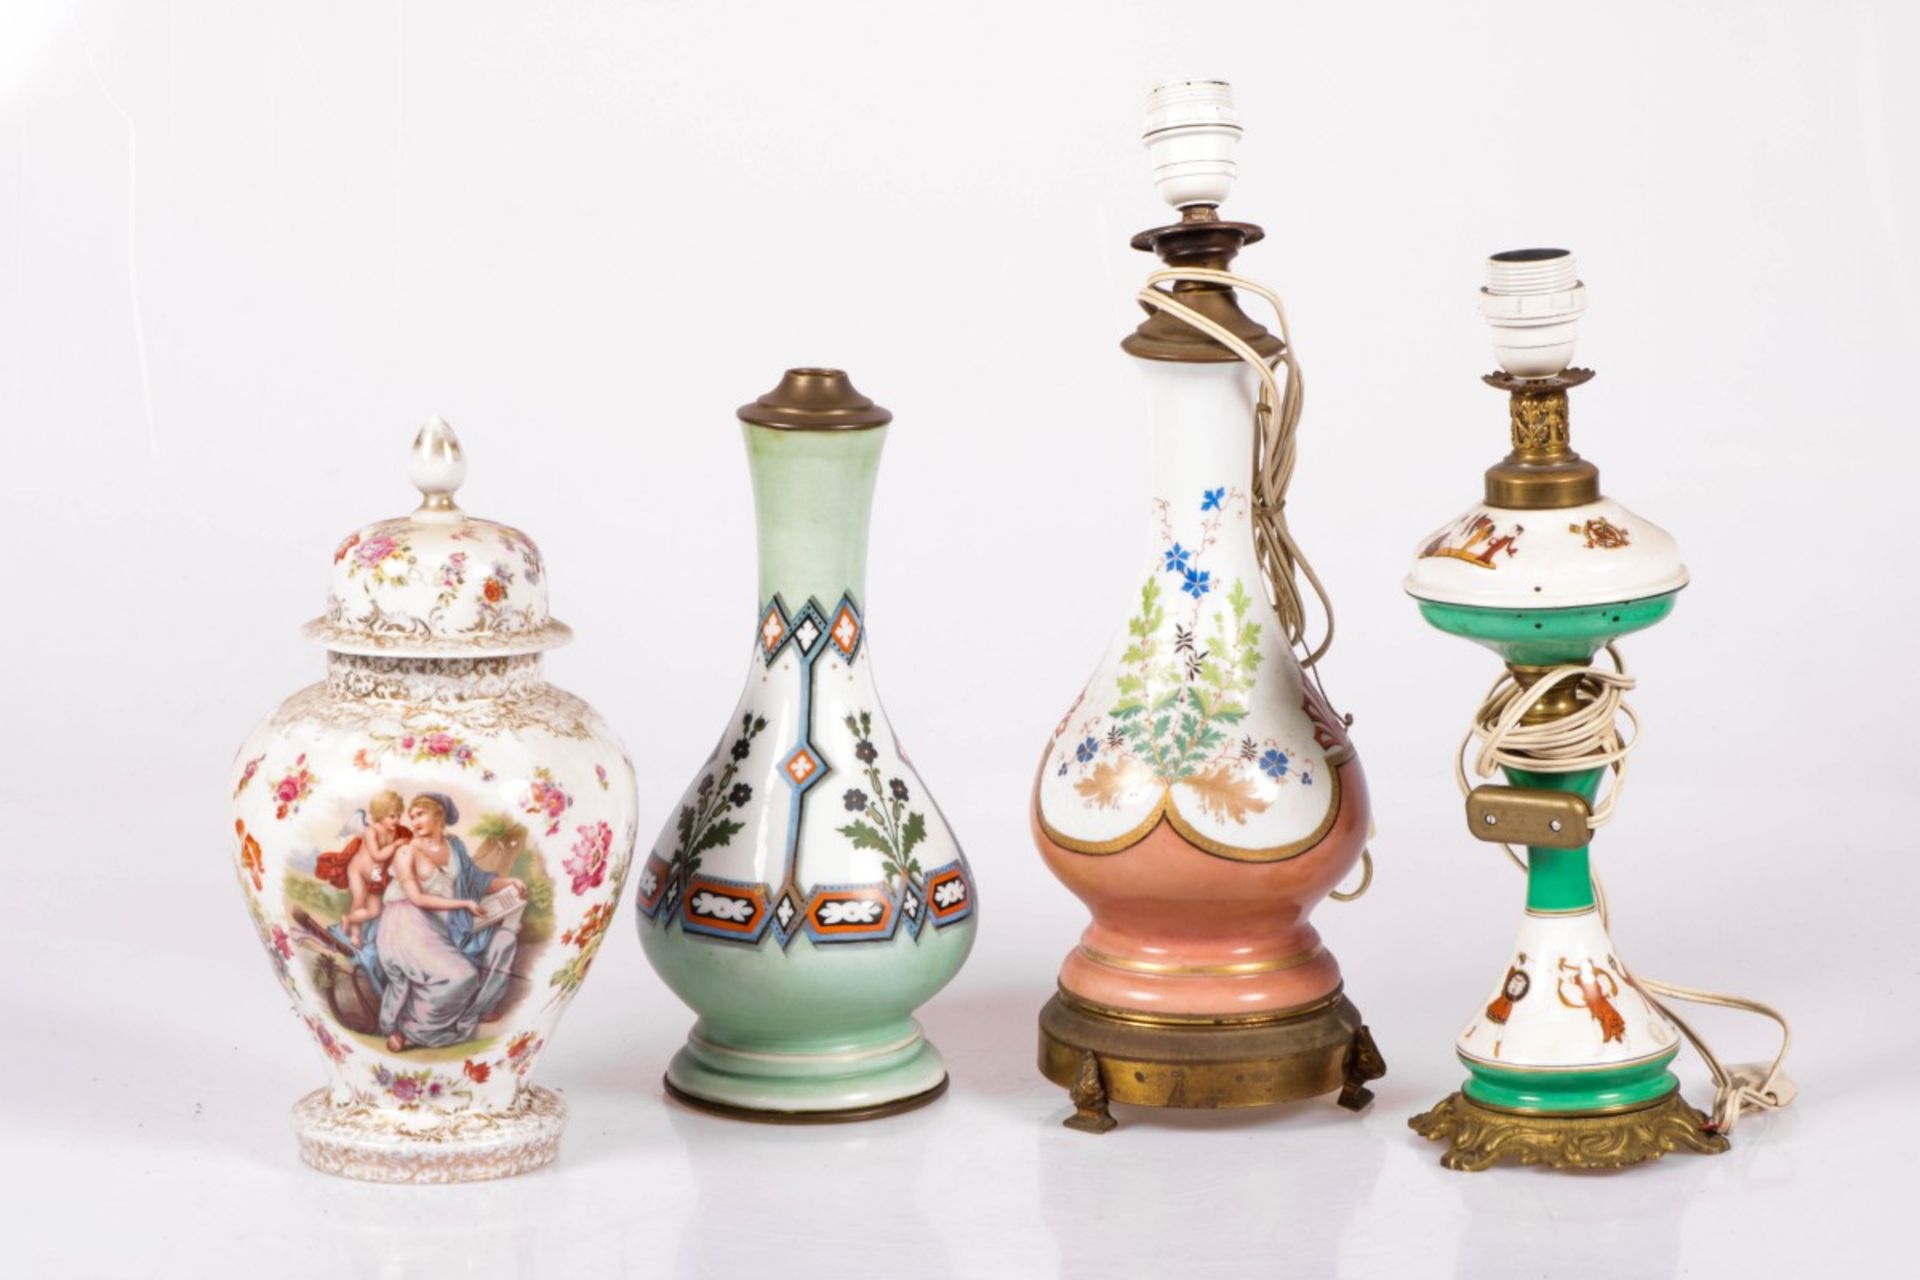 A lot of various porcelain, France & Germany, 20th century.